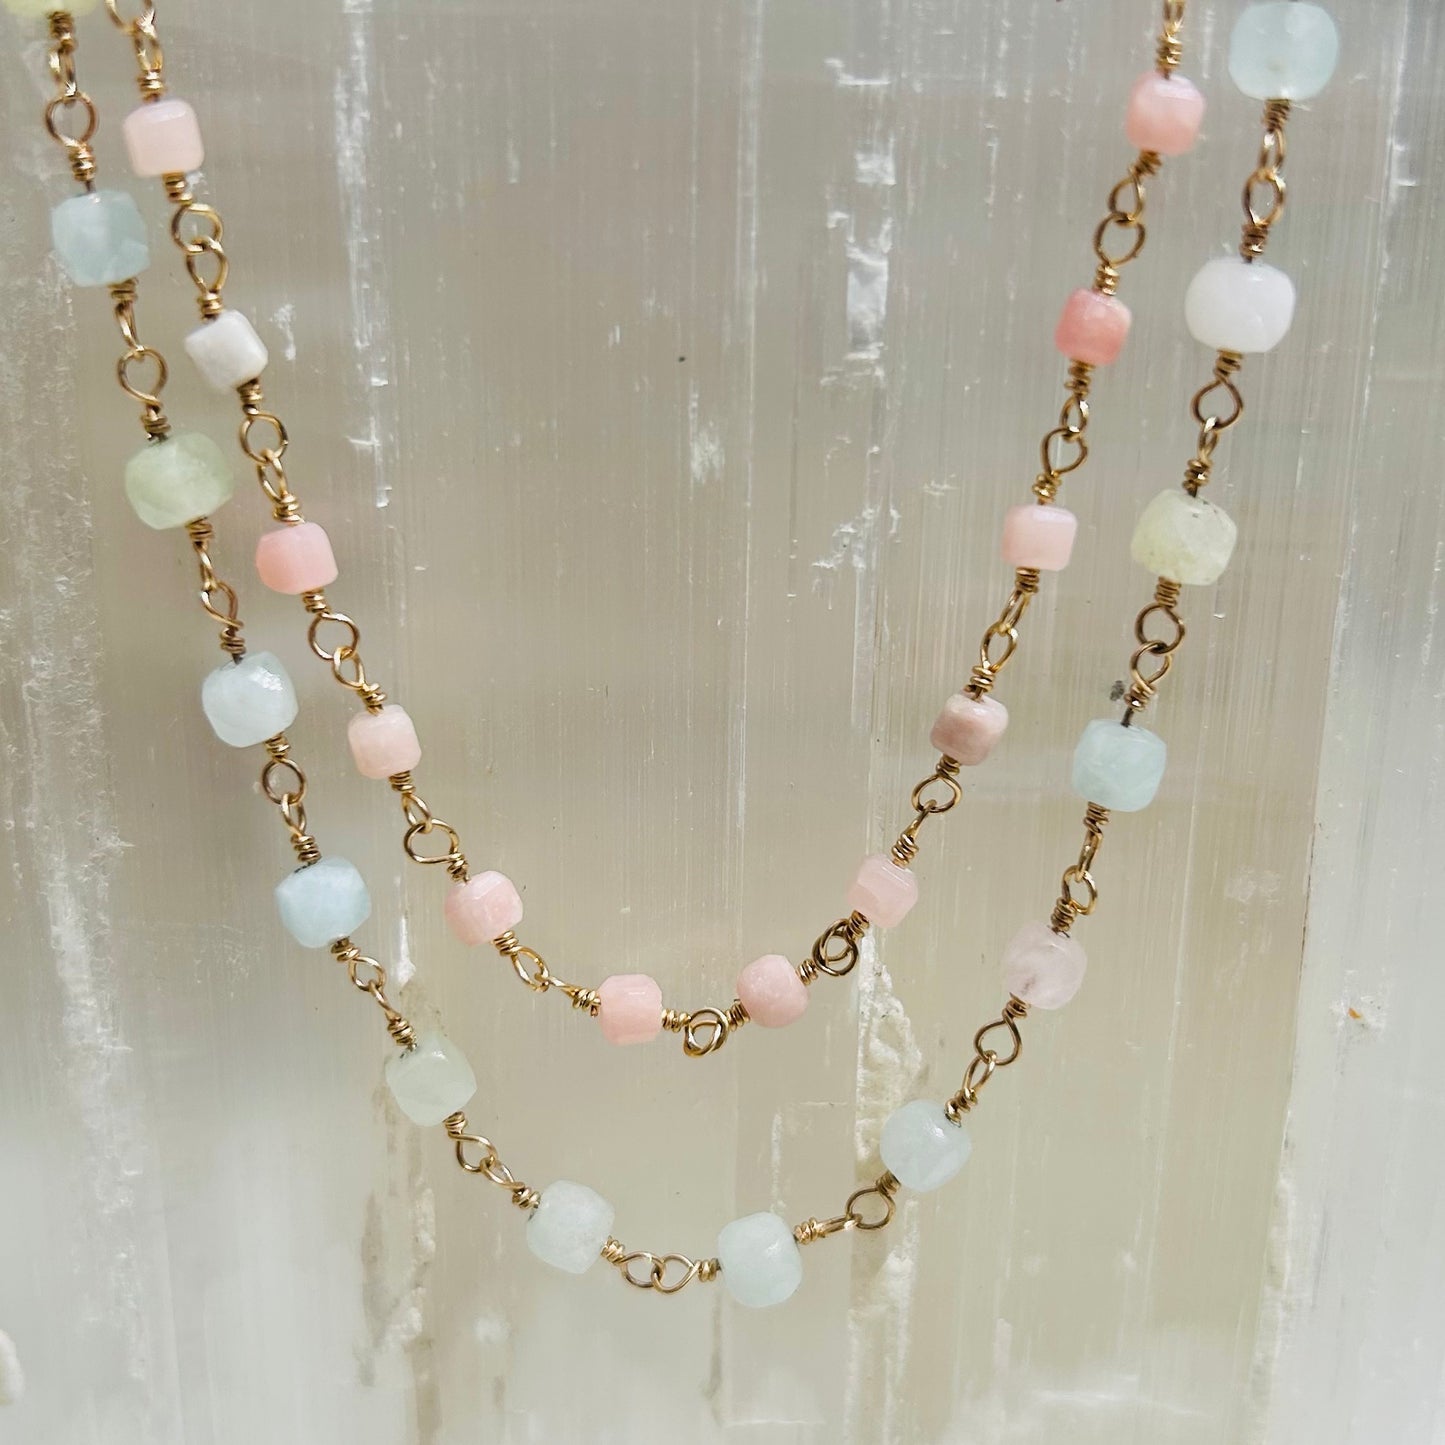 Gemstone Rosary Necklace ~ Pink Peruvian Opal Cubes